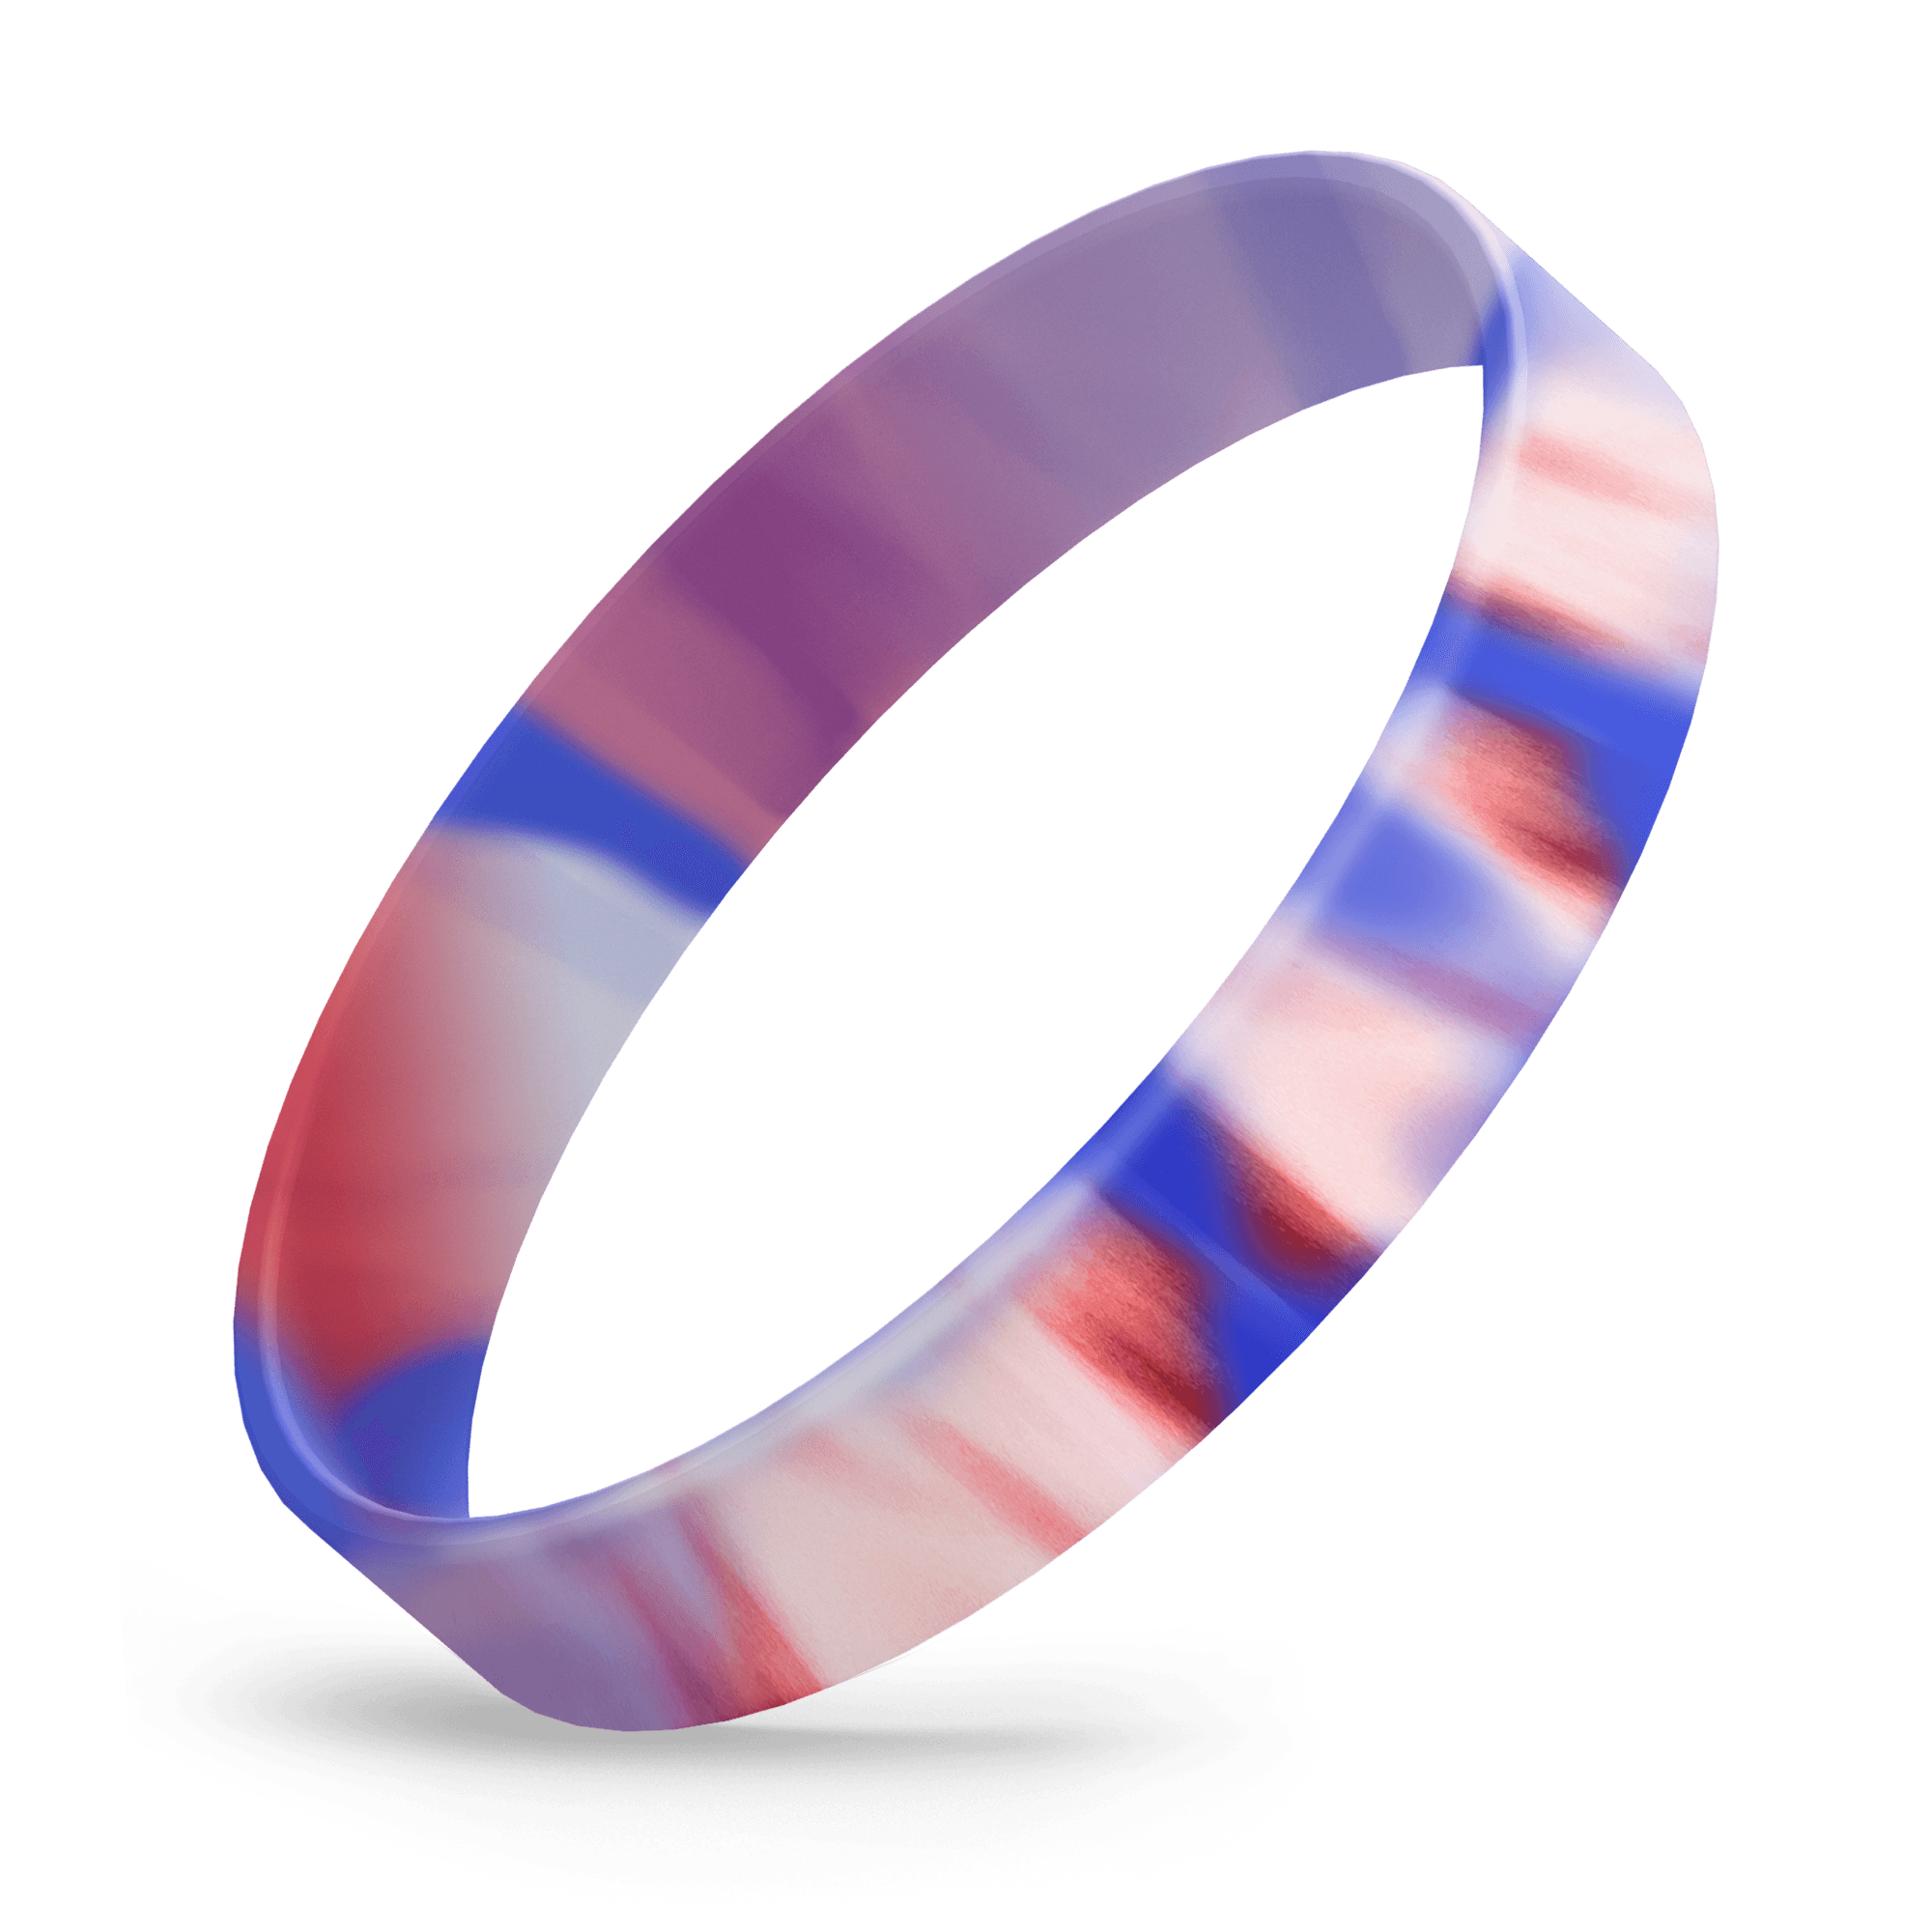 Custom Ink Injected (Red / White / Blue Swirl) Silicone Wristbands - Rubber Bracelets by Wristband Resources